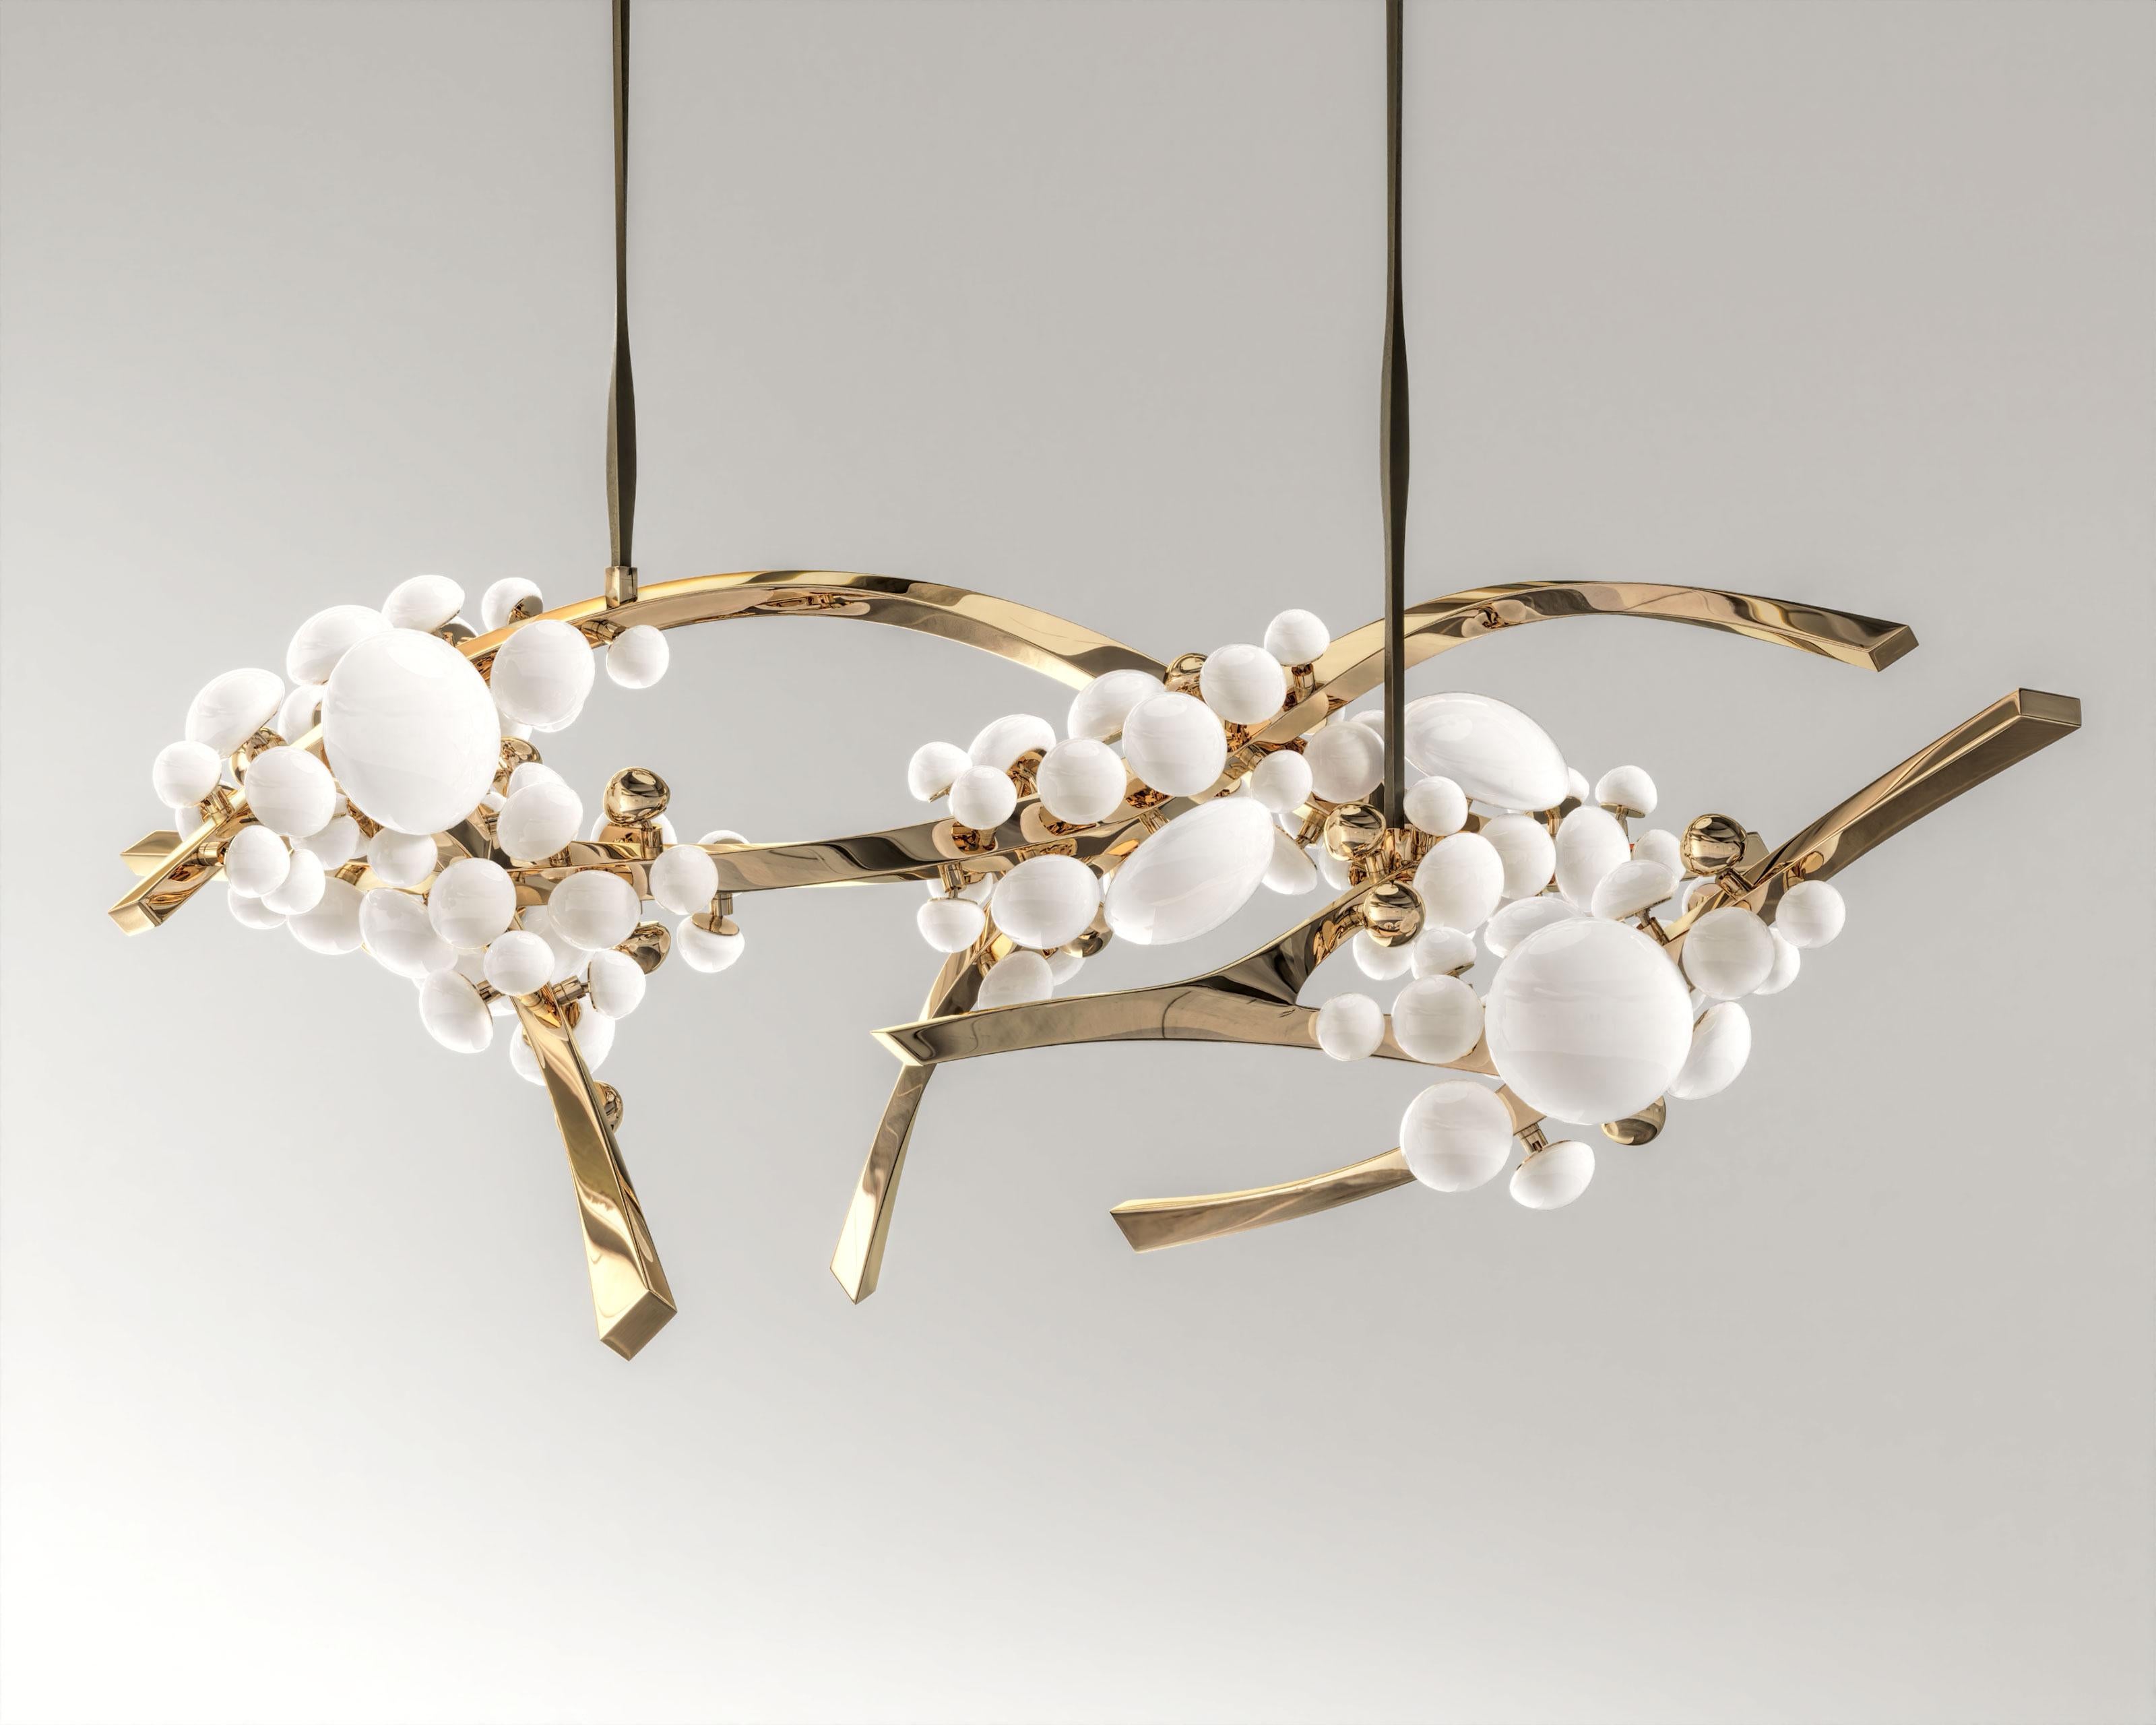 Intıma Horizontal Polished Bronze Chandelier
Intima Chandelier, whe­re modern design me­rges with nature’s inspiration. This isn’t mere­ly a light fixture; it’s a centerpie­ce that breathes life­ into any space. Choose from three­ stunning finishes: